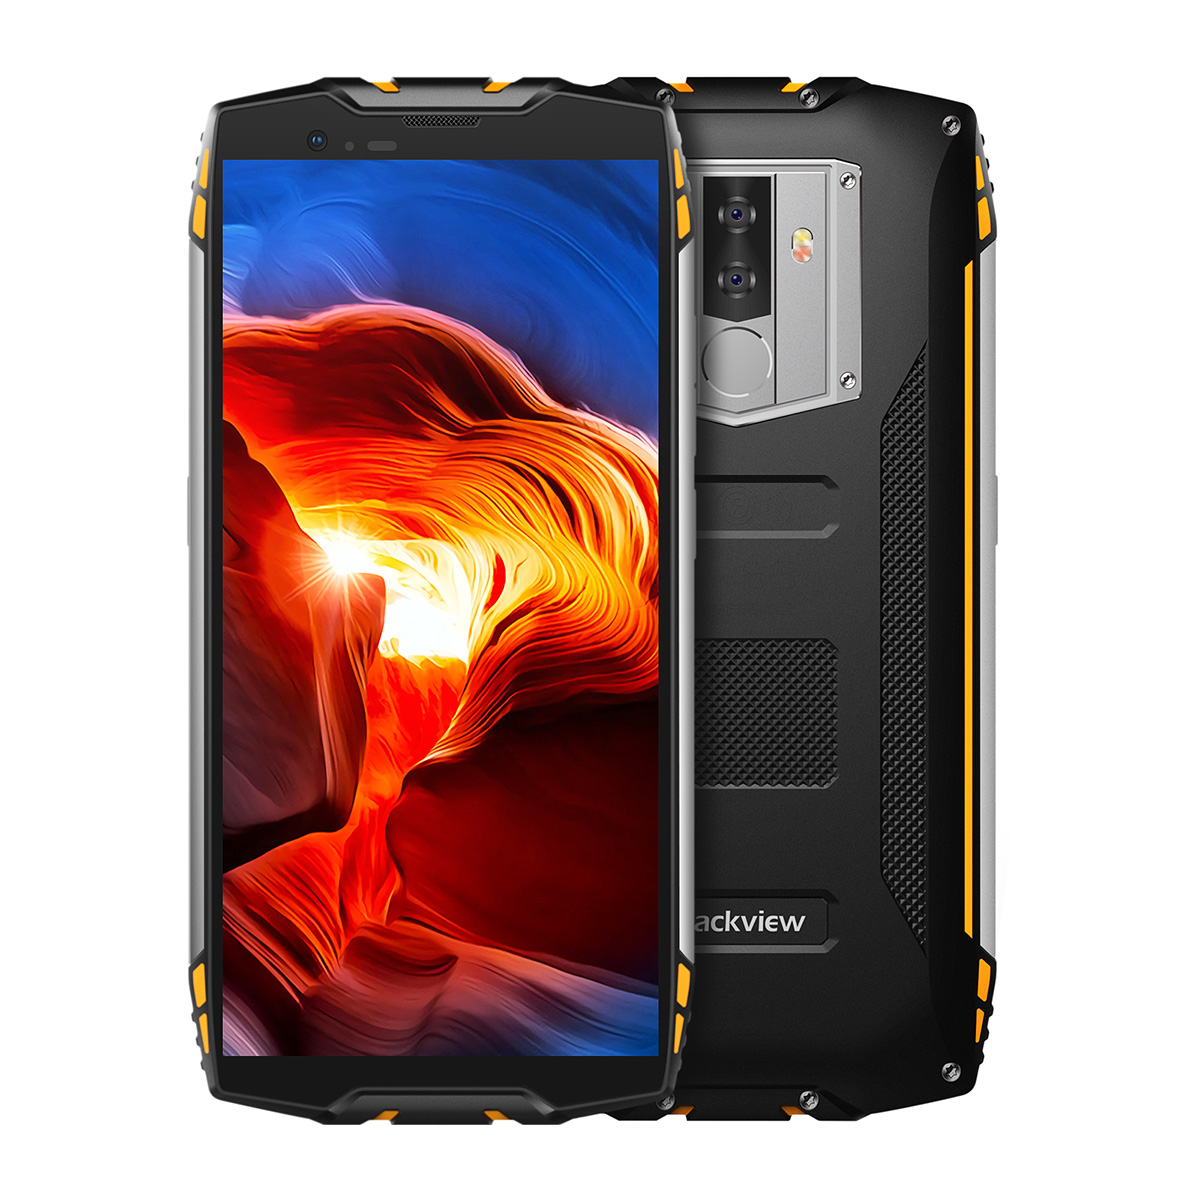 Blackview BV6800 Pro Android 8.0 Outdoor Mobile Phone 5.7" MT6750T Octa Core 4GB+64GB 6580mAh Waterproof NFC Rugged Smartphone